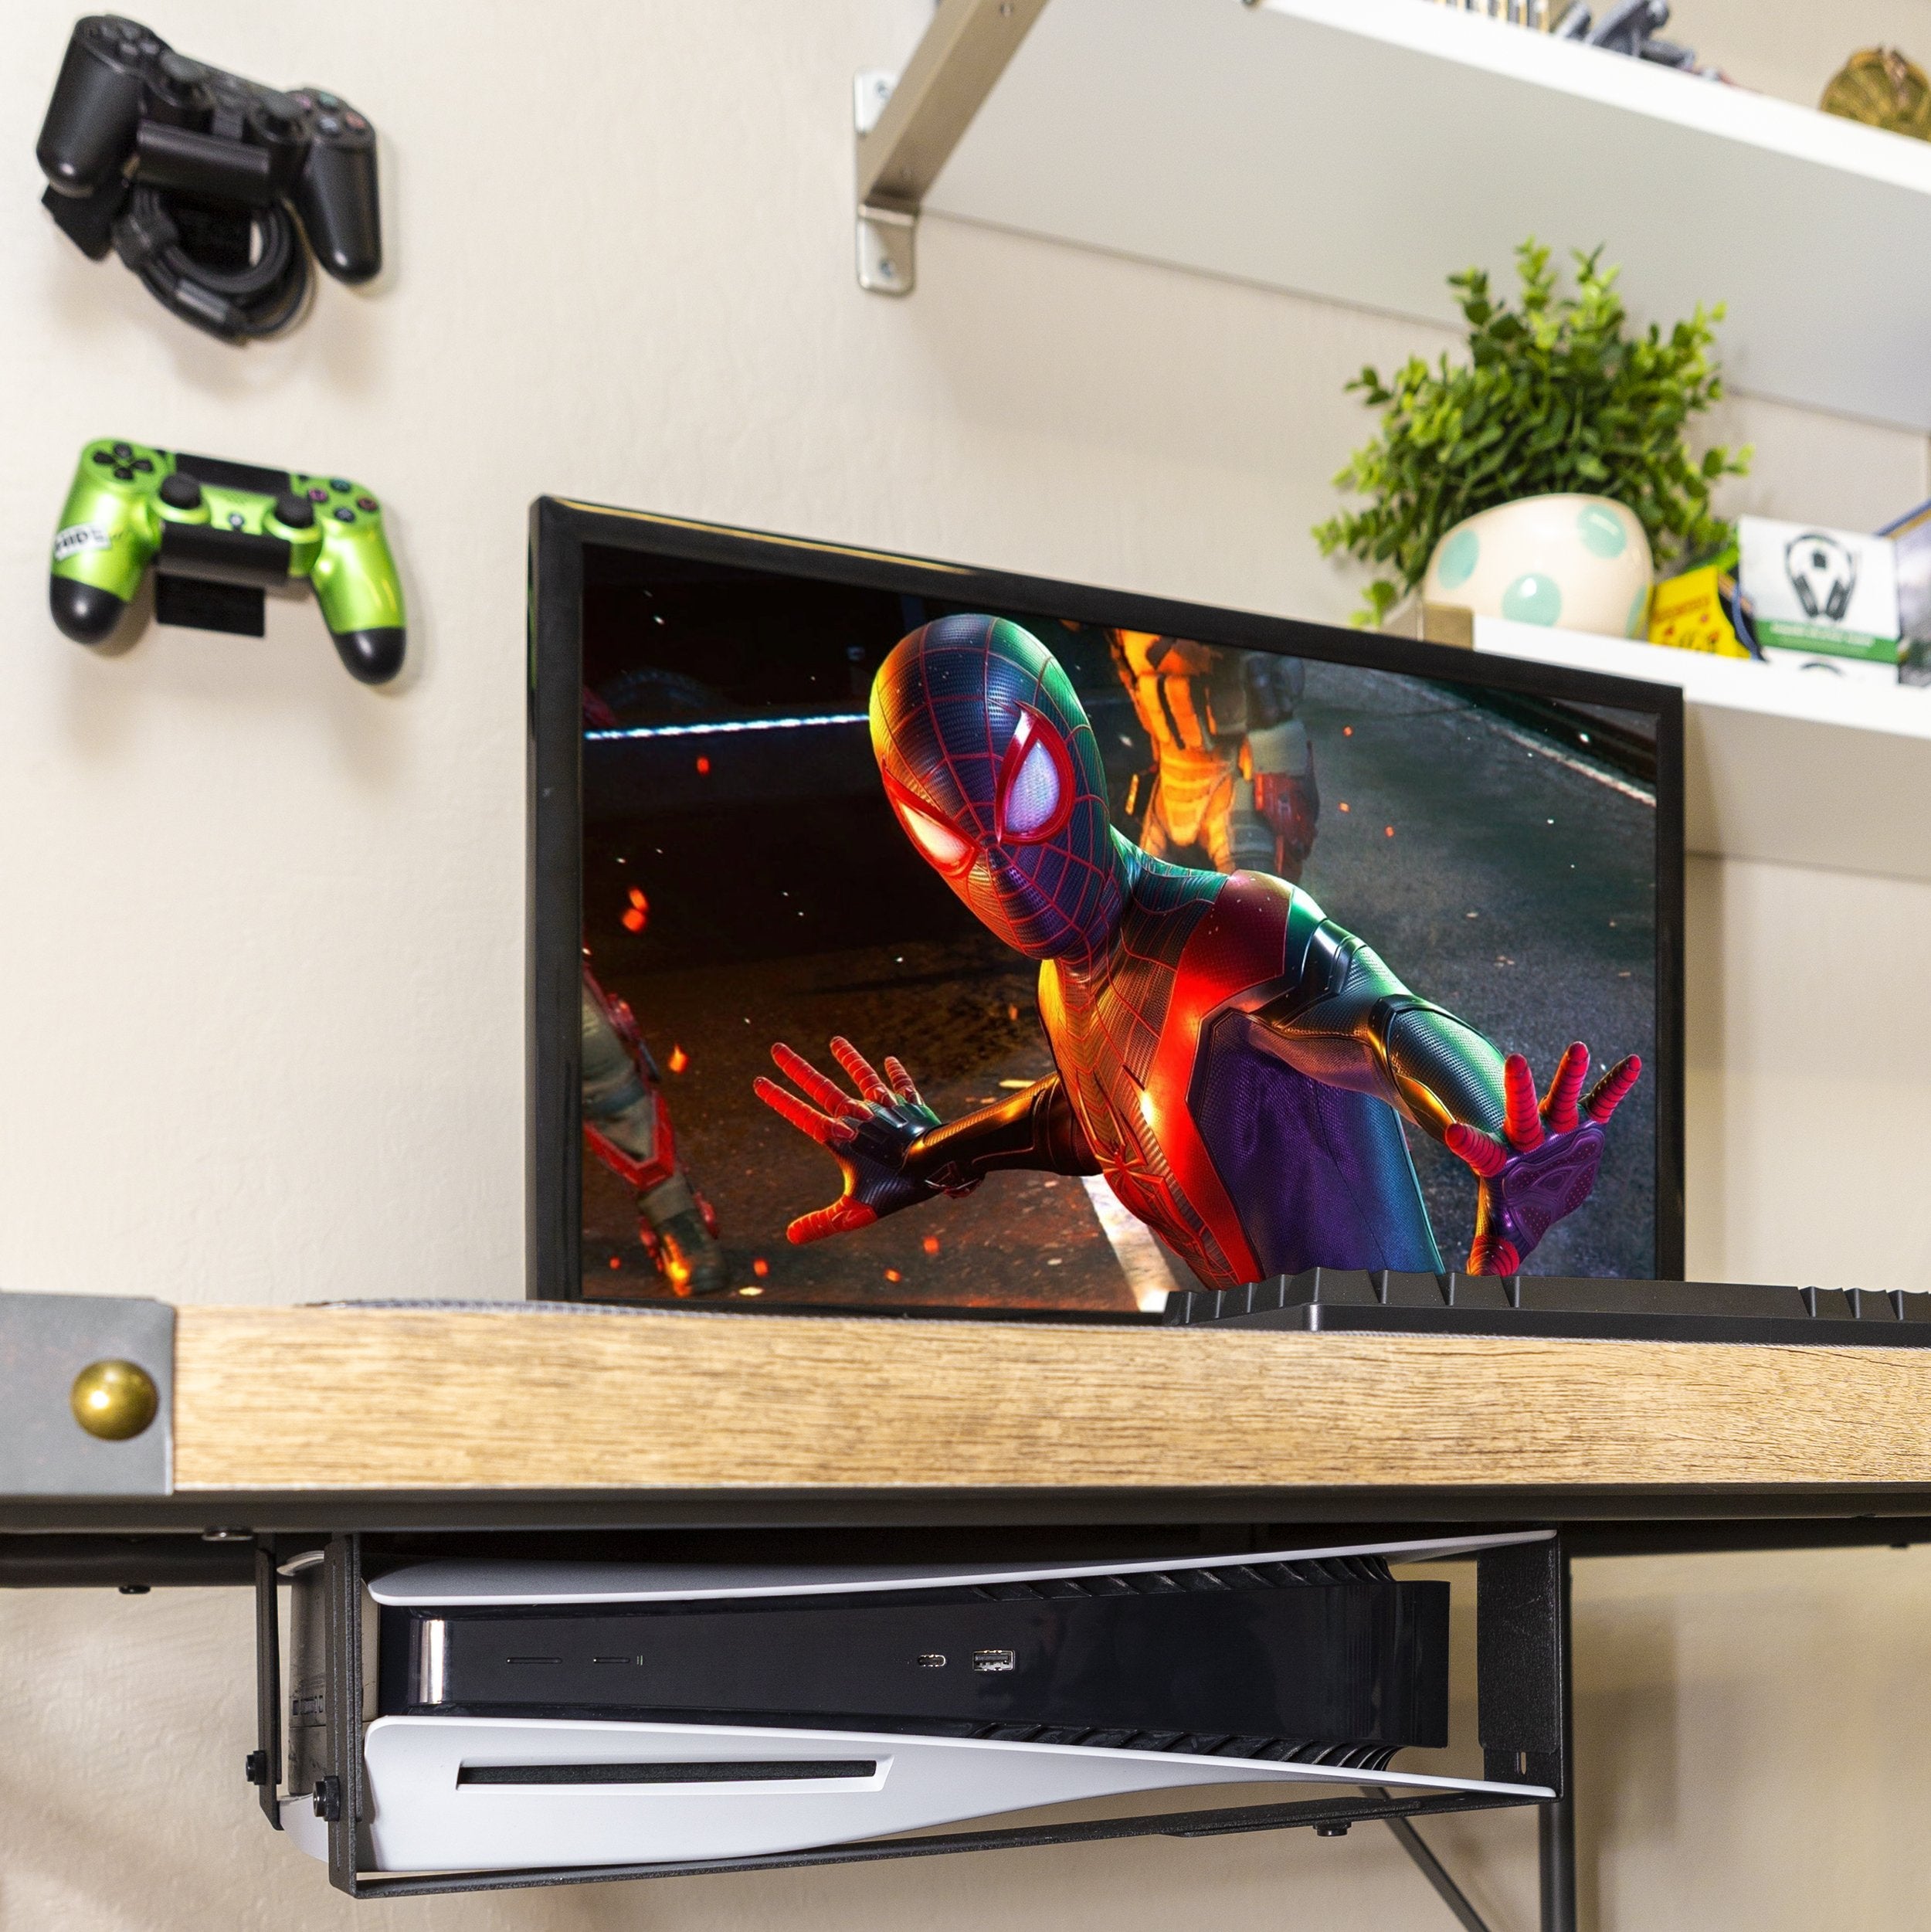 HIDEit Mounts Uni-LXW PS5 under-desk mount with two controller mounts and screen image of Spider-Man: Miles Morales